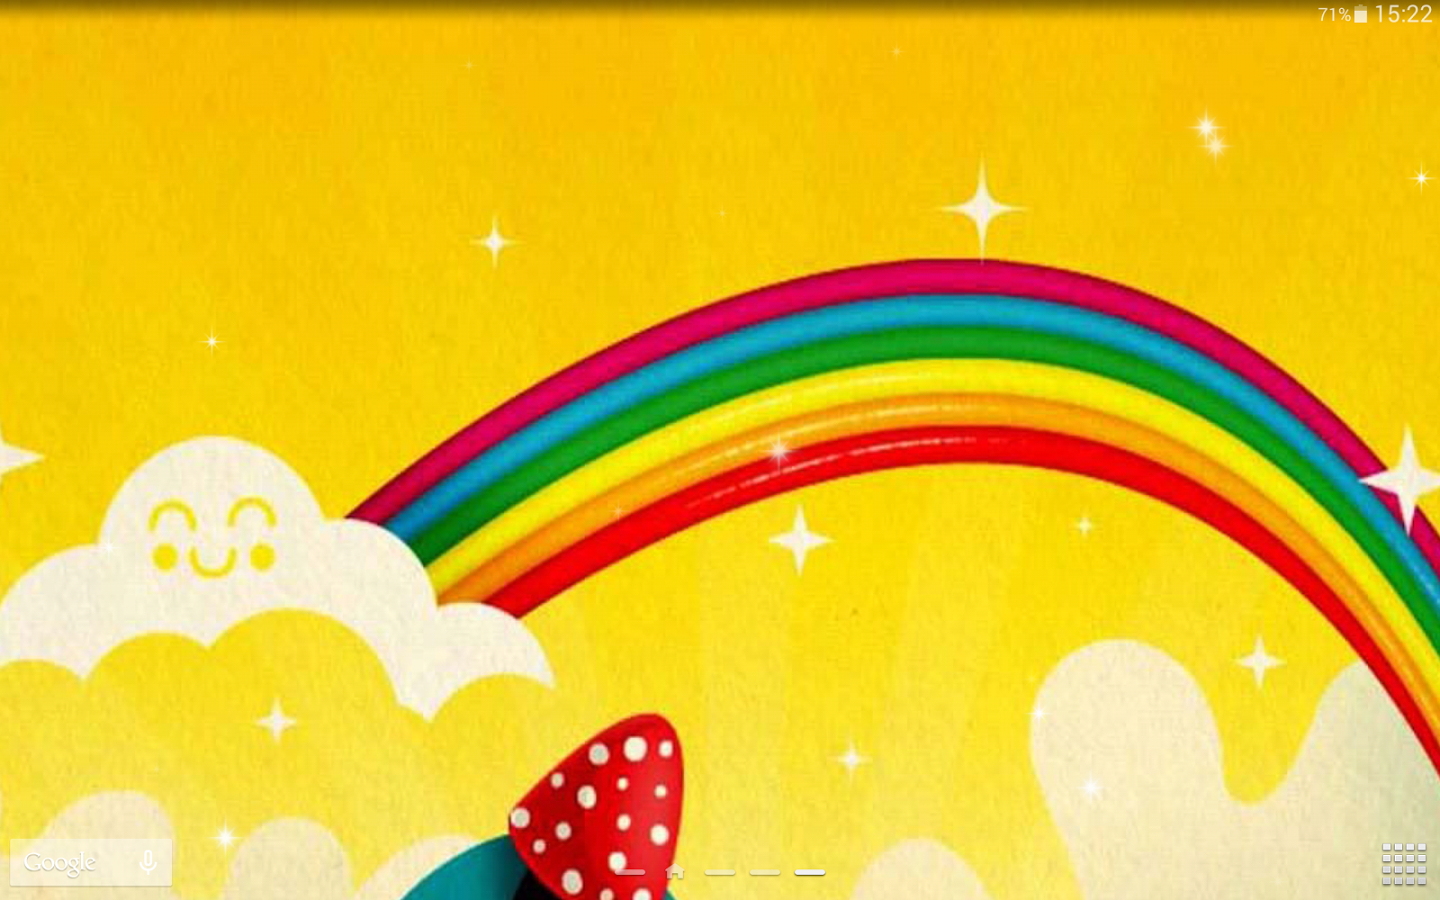 Cute Rainbow Live Wallpaper   Android Apps on Google Play